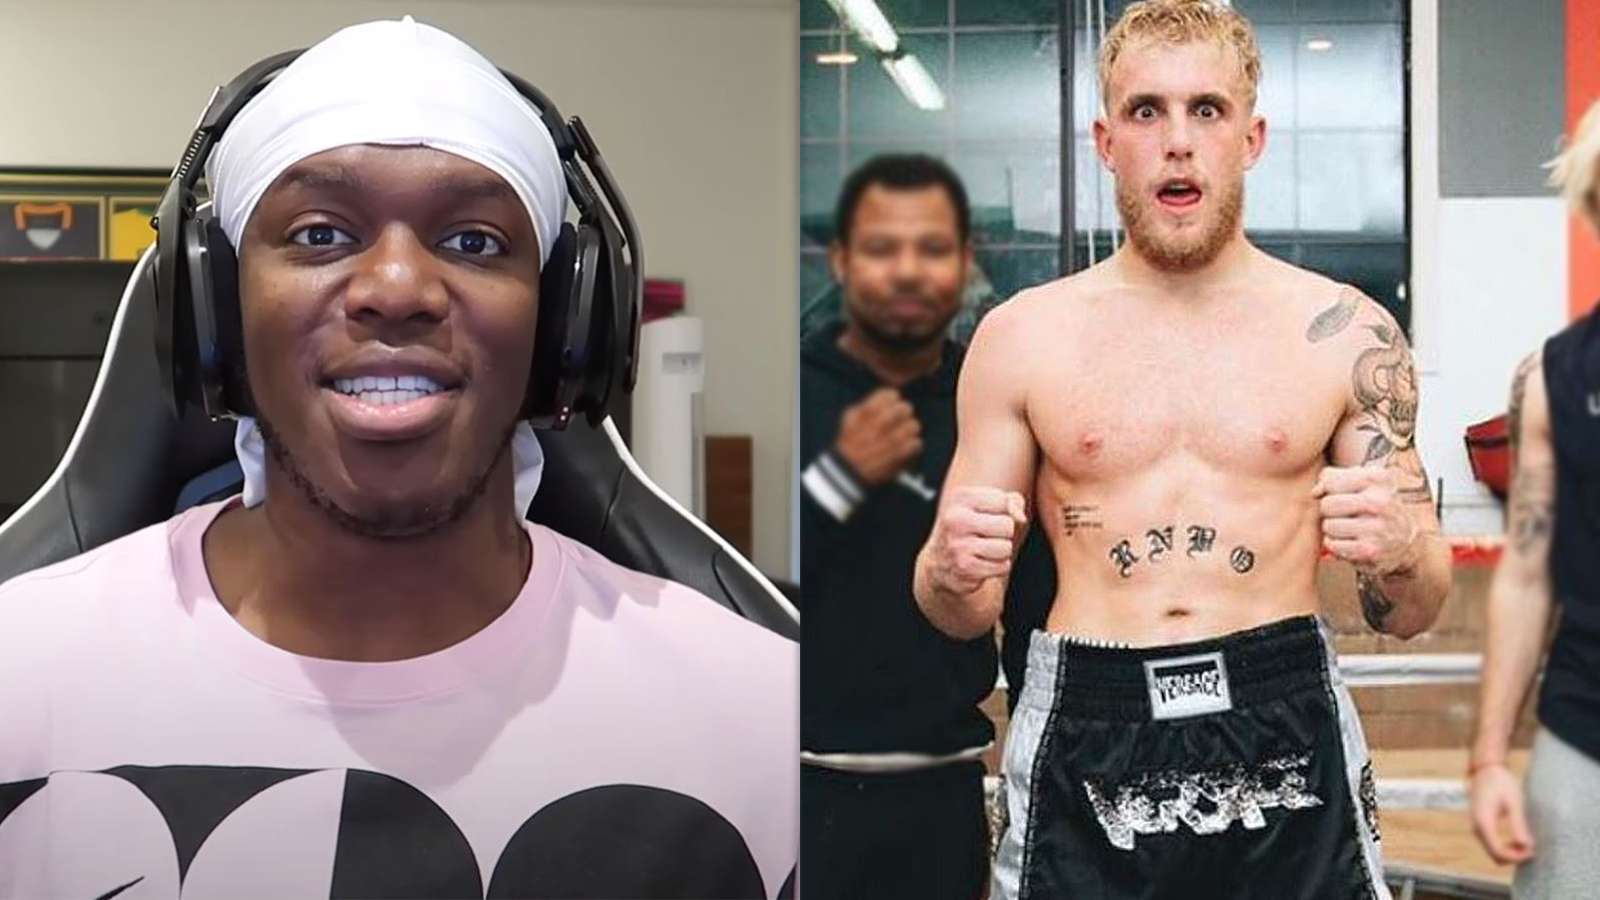 KSI talks to the camera while Jake Paul poses with his boxing crew.